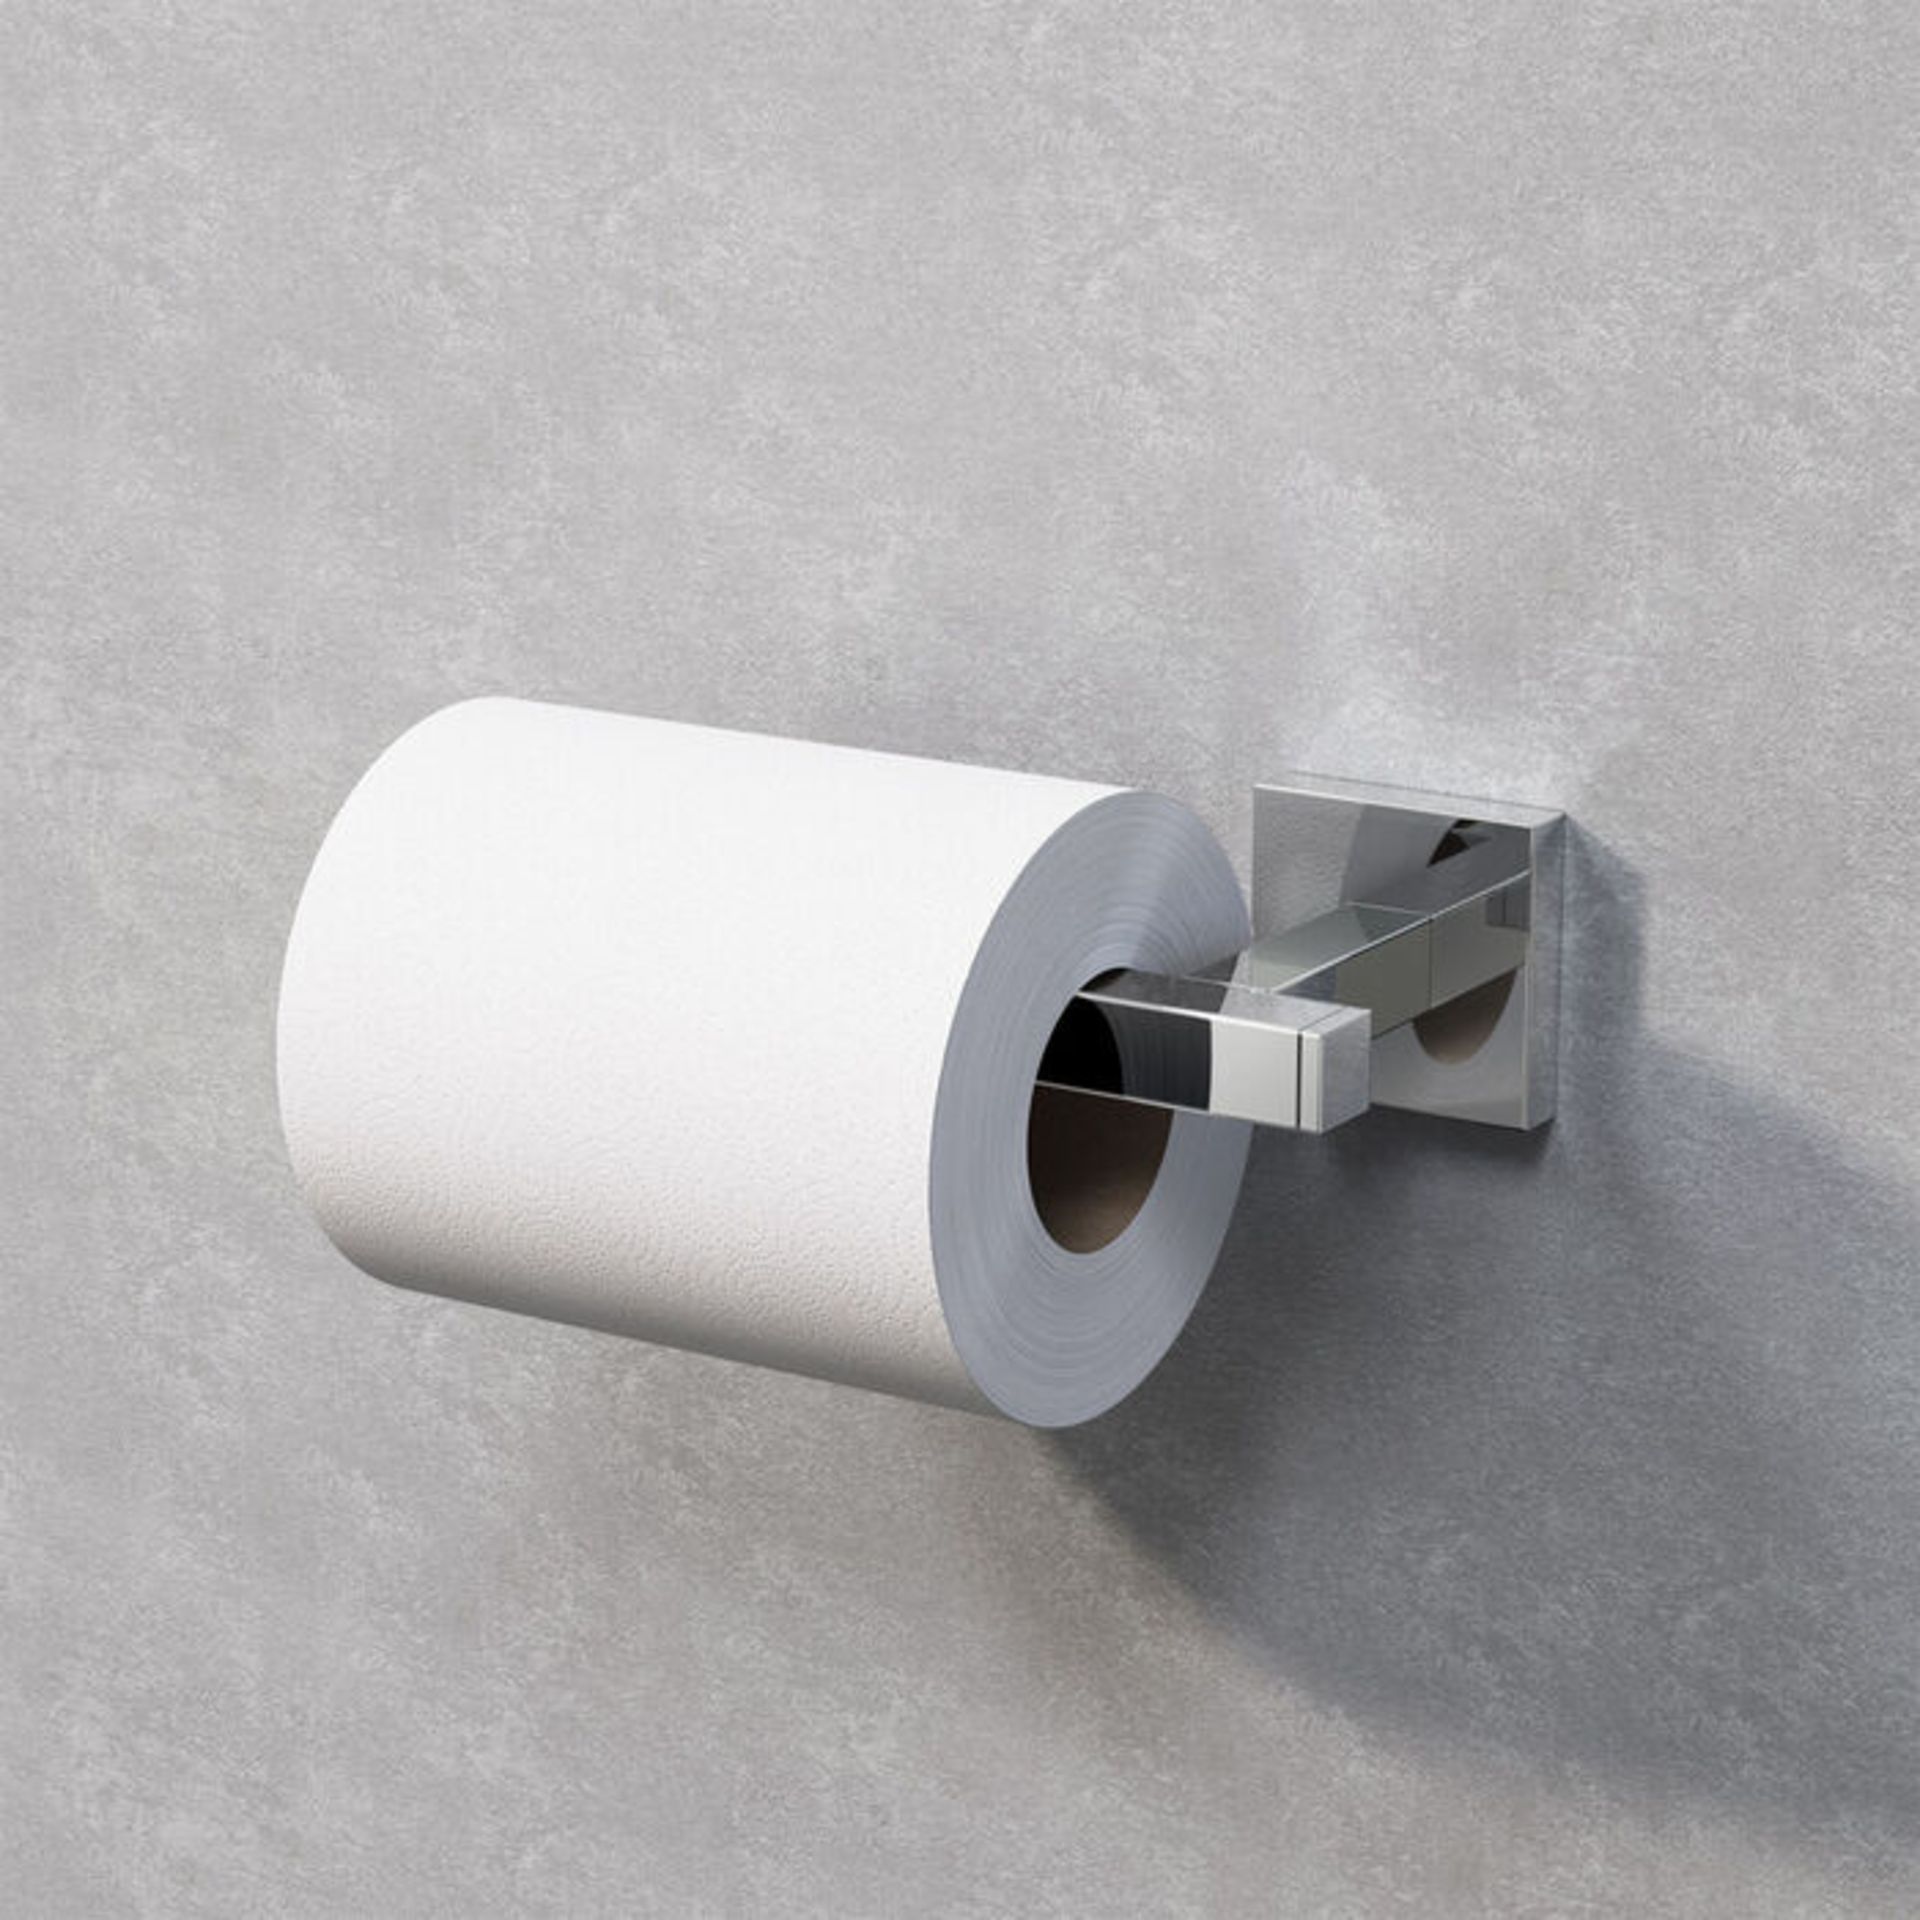 (FF1002) Jesmond Toilet Roll Holder Finishes your bathroom with a little extra functionality a... - Image 2 of 3